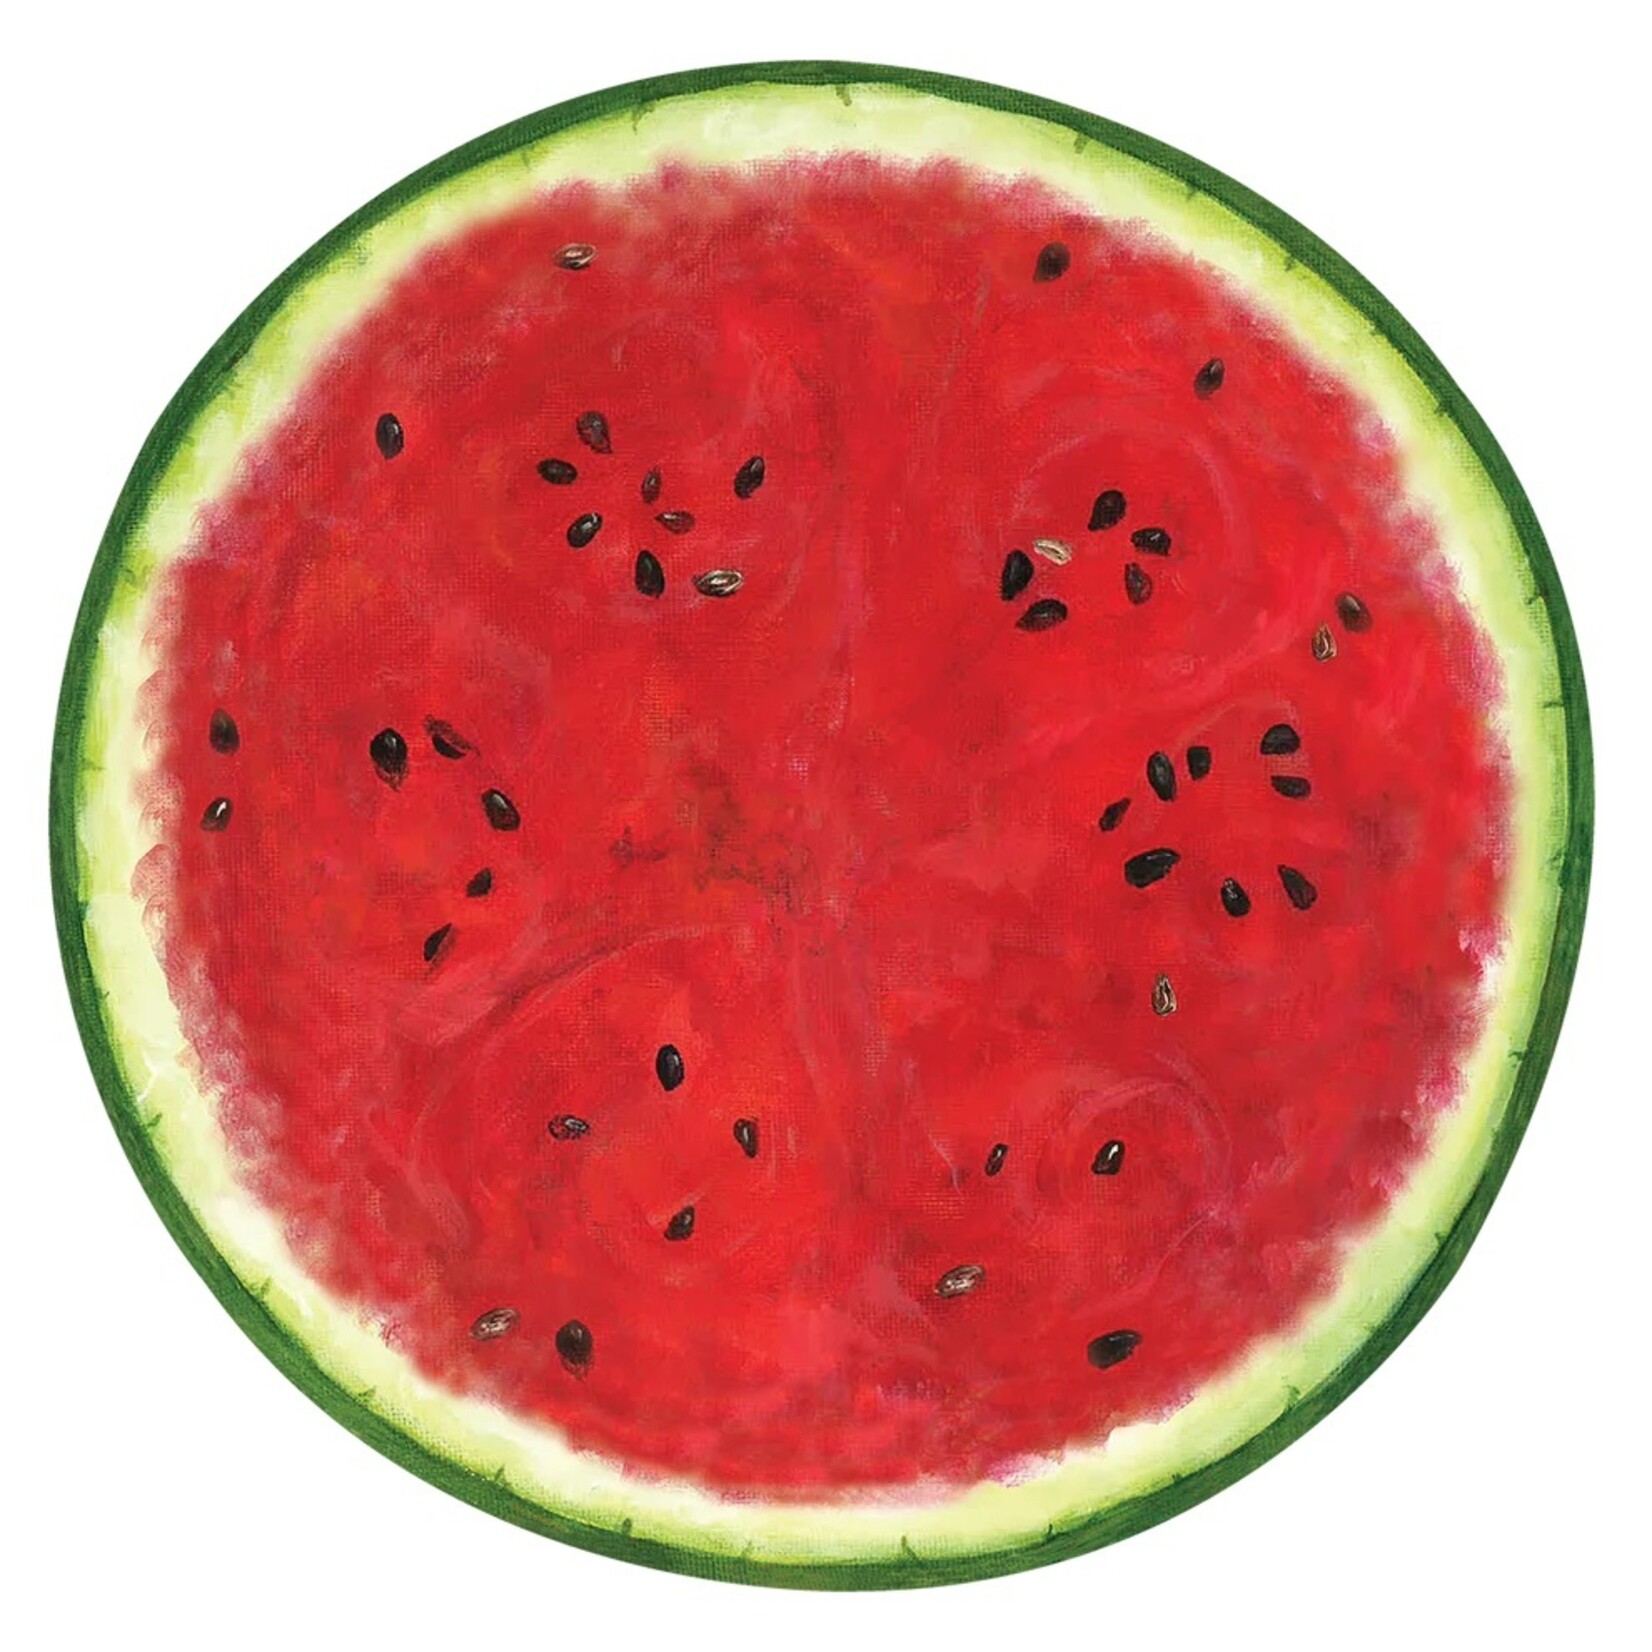 Hester & Cook Die Cut Watermelon Placemat